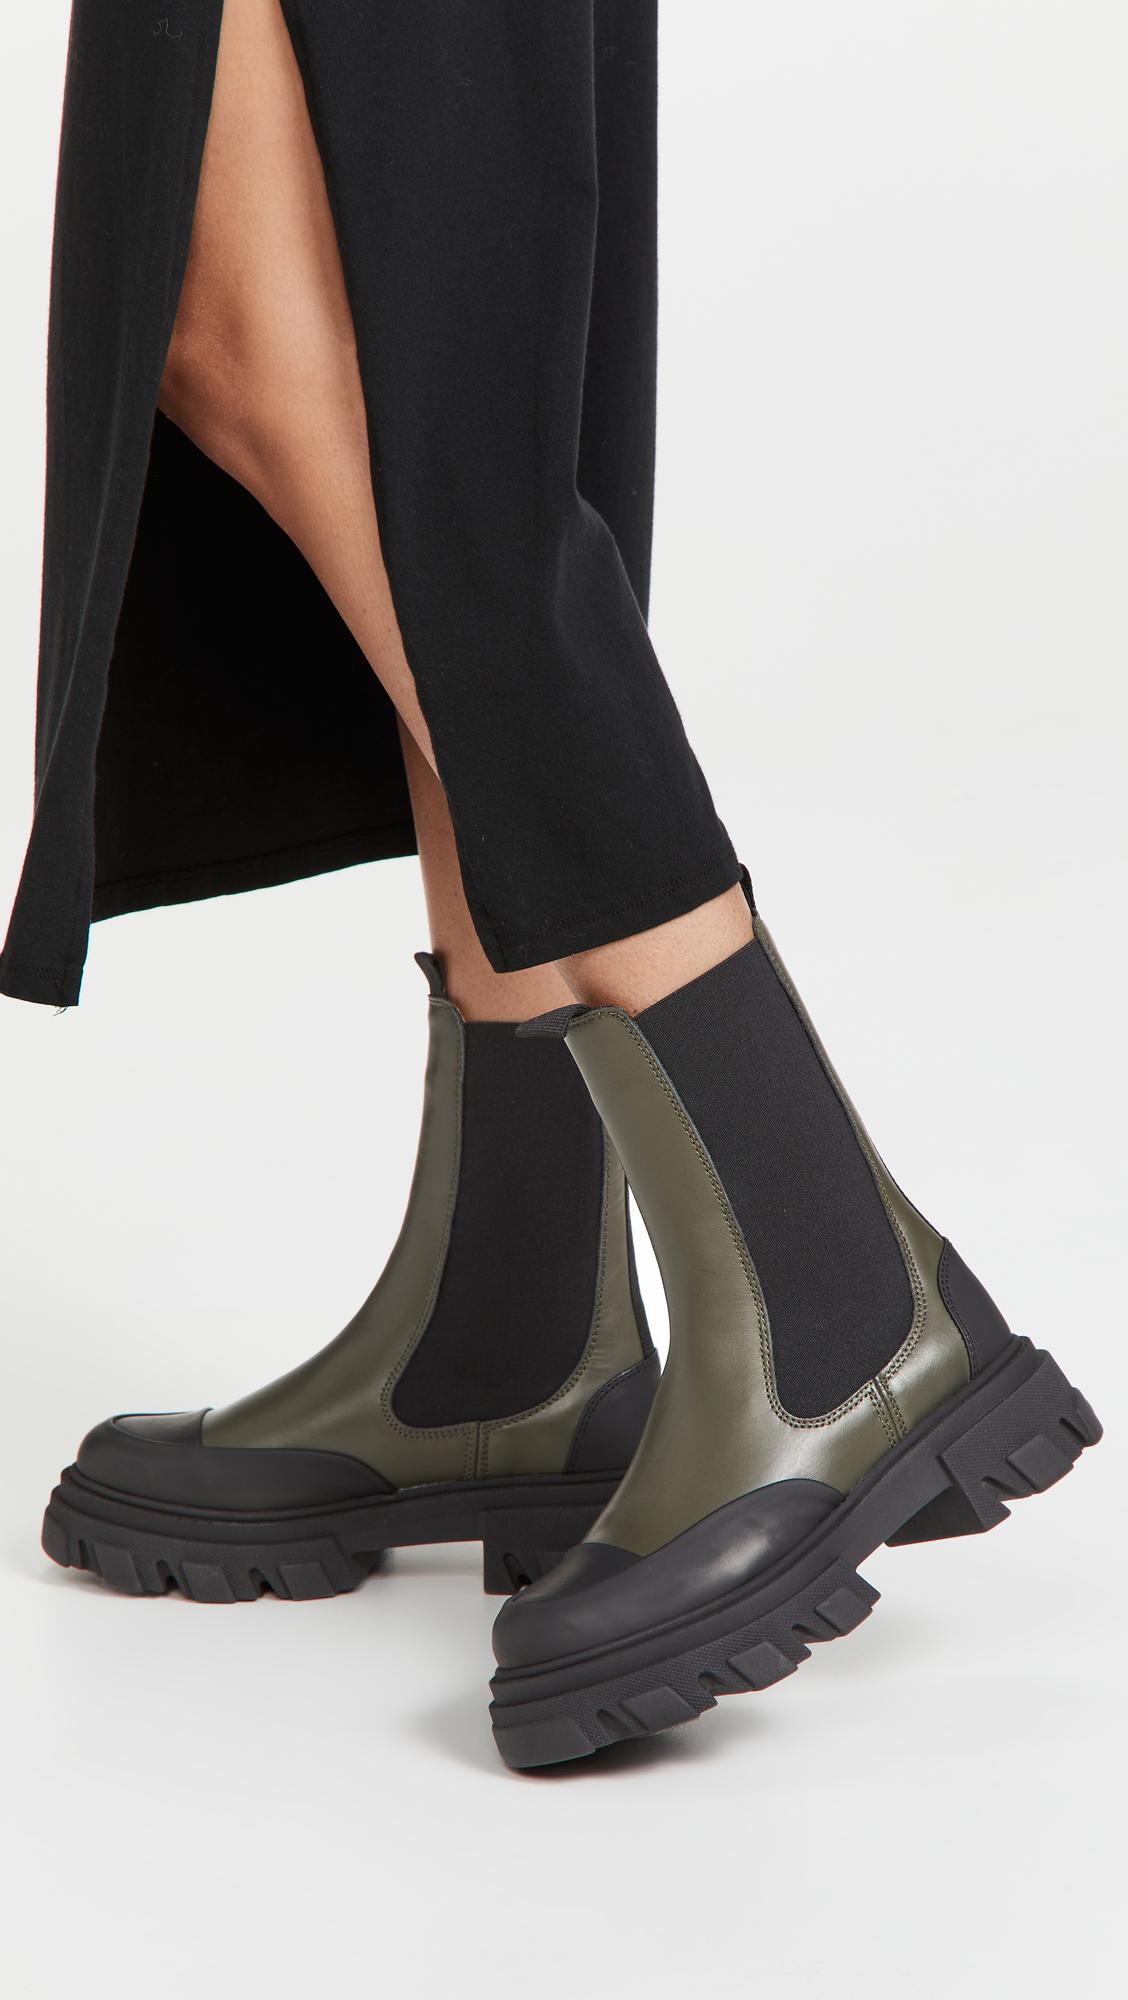 Ganni Leather Mid Chelsea Boots in Black - Lyst